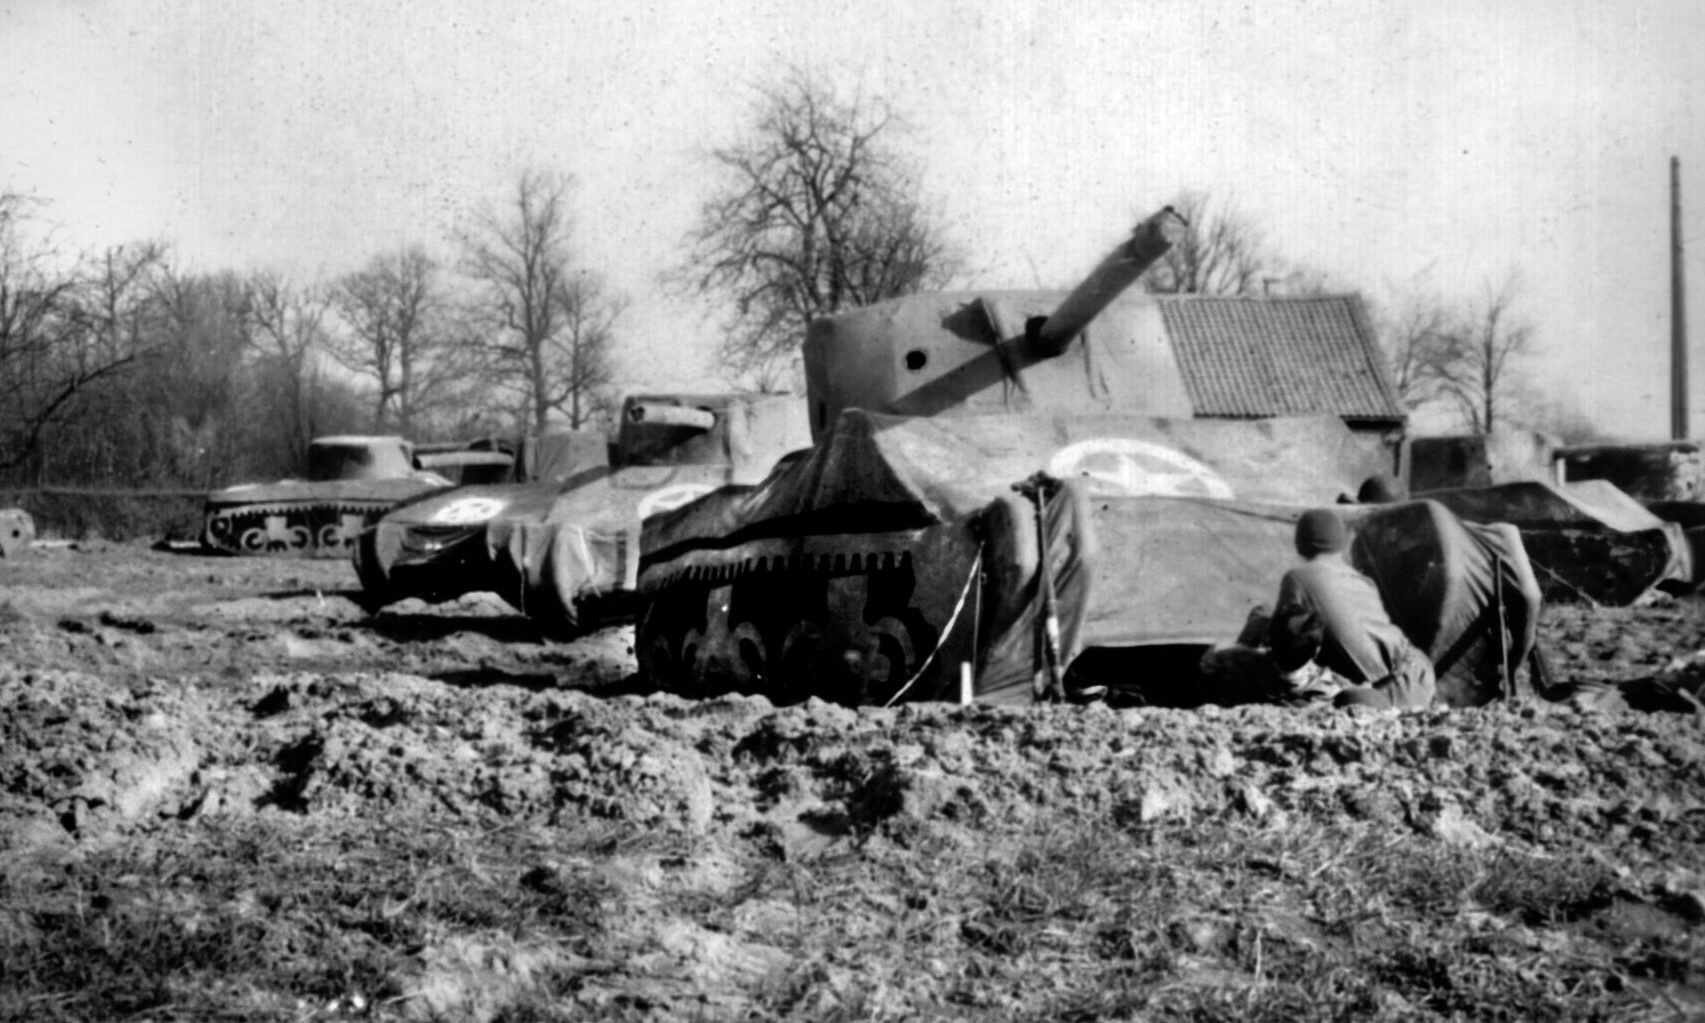 The bogus decoy tanks and airplanes could be inflated in mere minutes with entire bases and airfields set up and dismantled in just a few hours, effectively summoning a battalion of 30,000 men out of thin air.